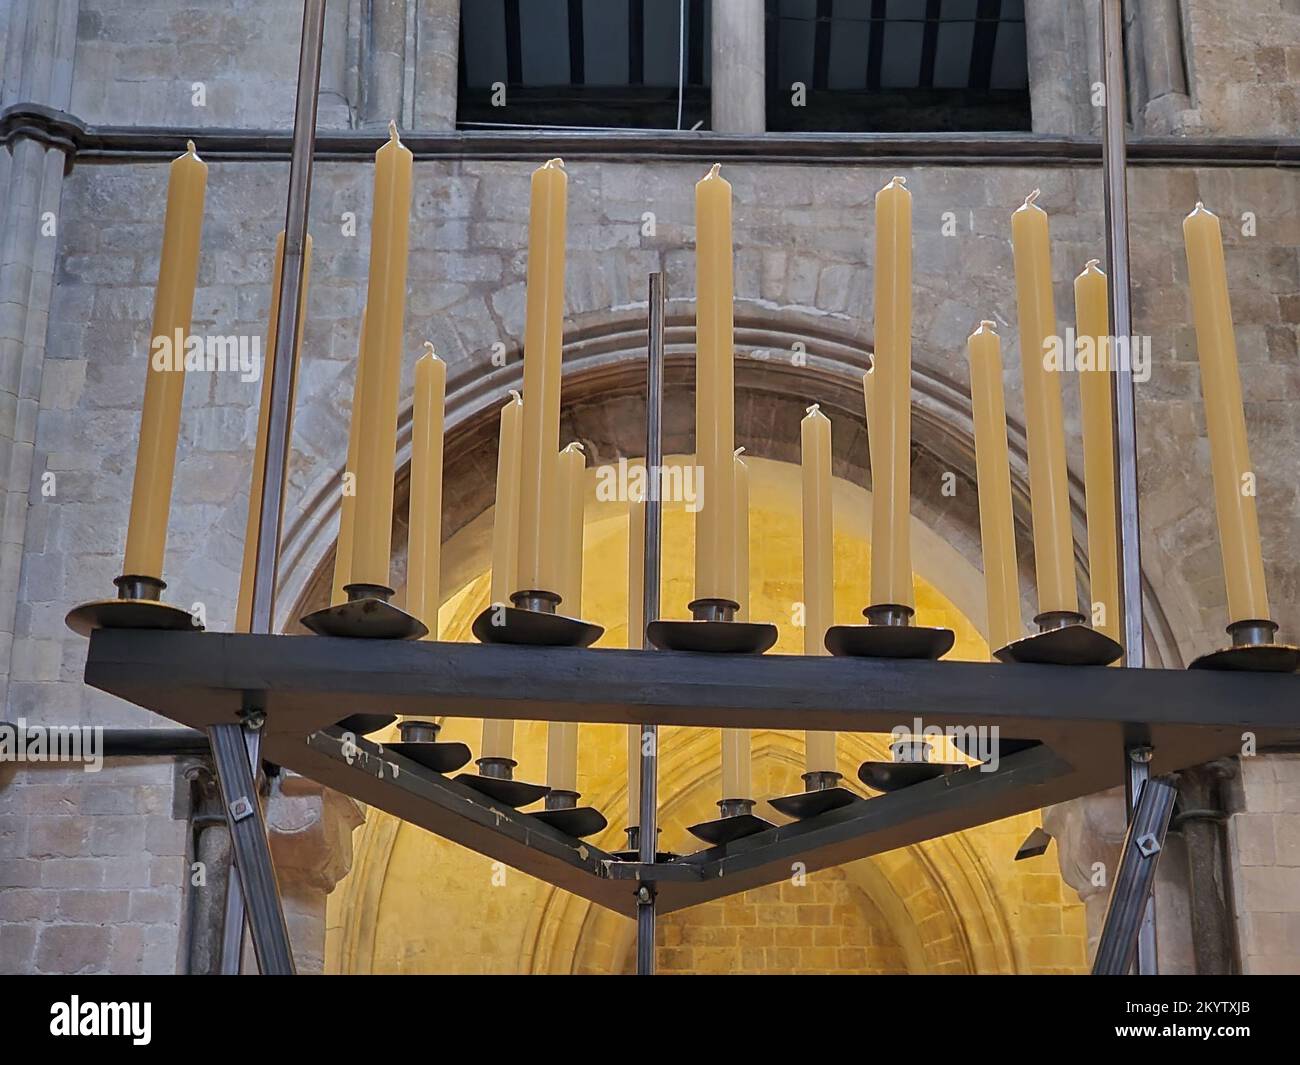 Close up of fresh new candle sticks seen in a black stand in the interior of a church building. Stock Photo